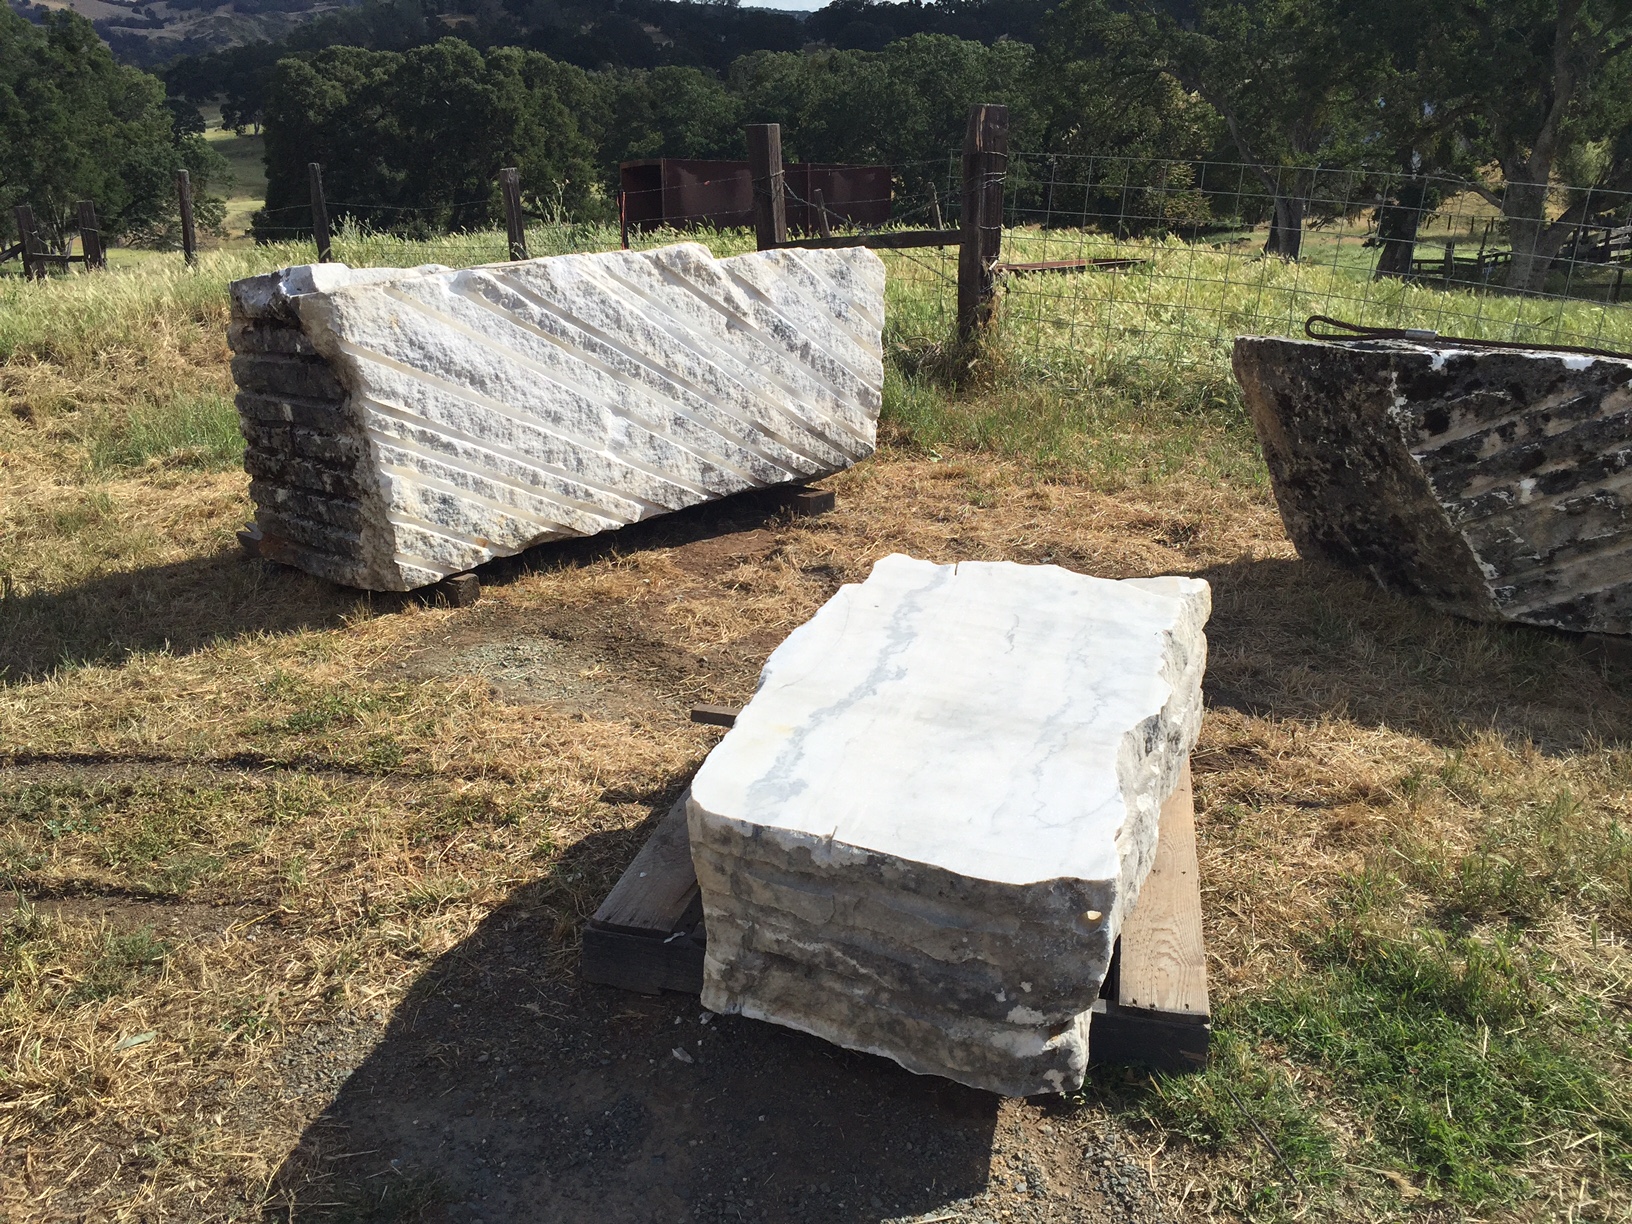 3 of the typical quarry blocks made available to us